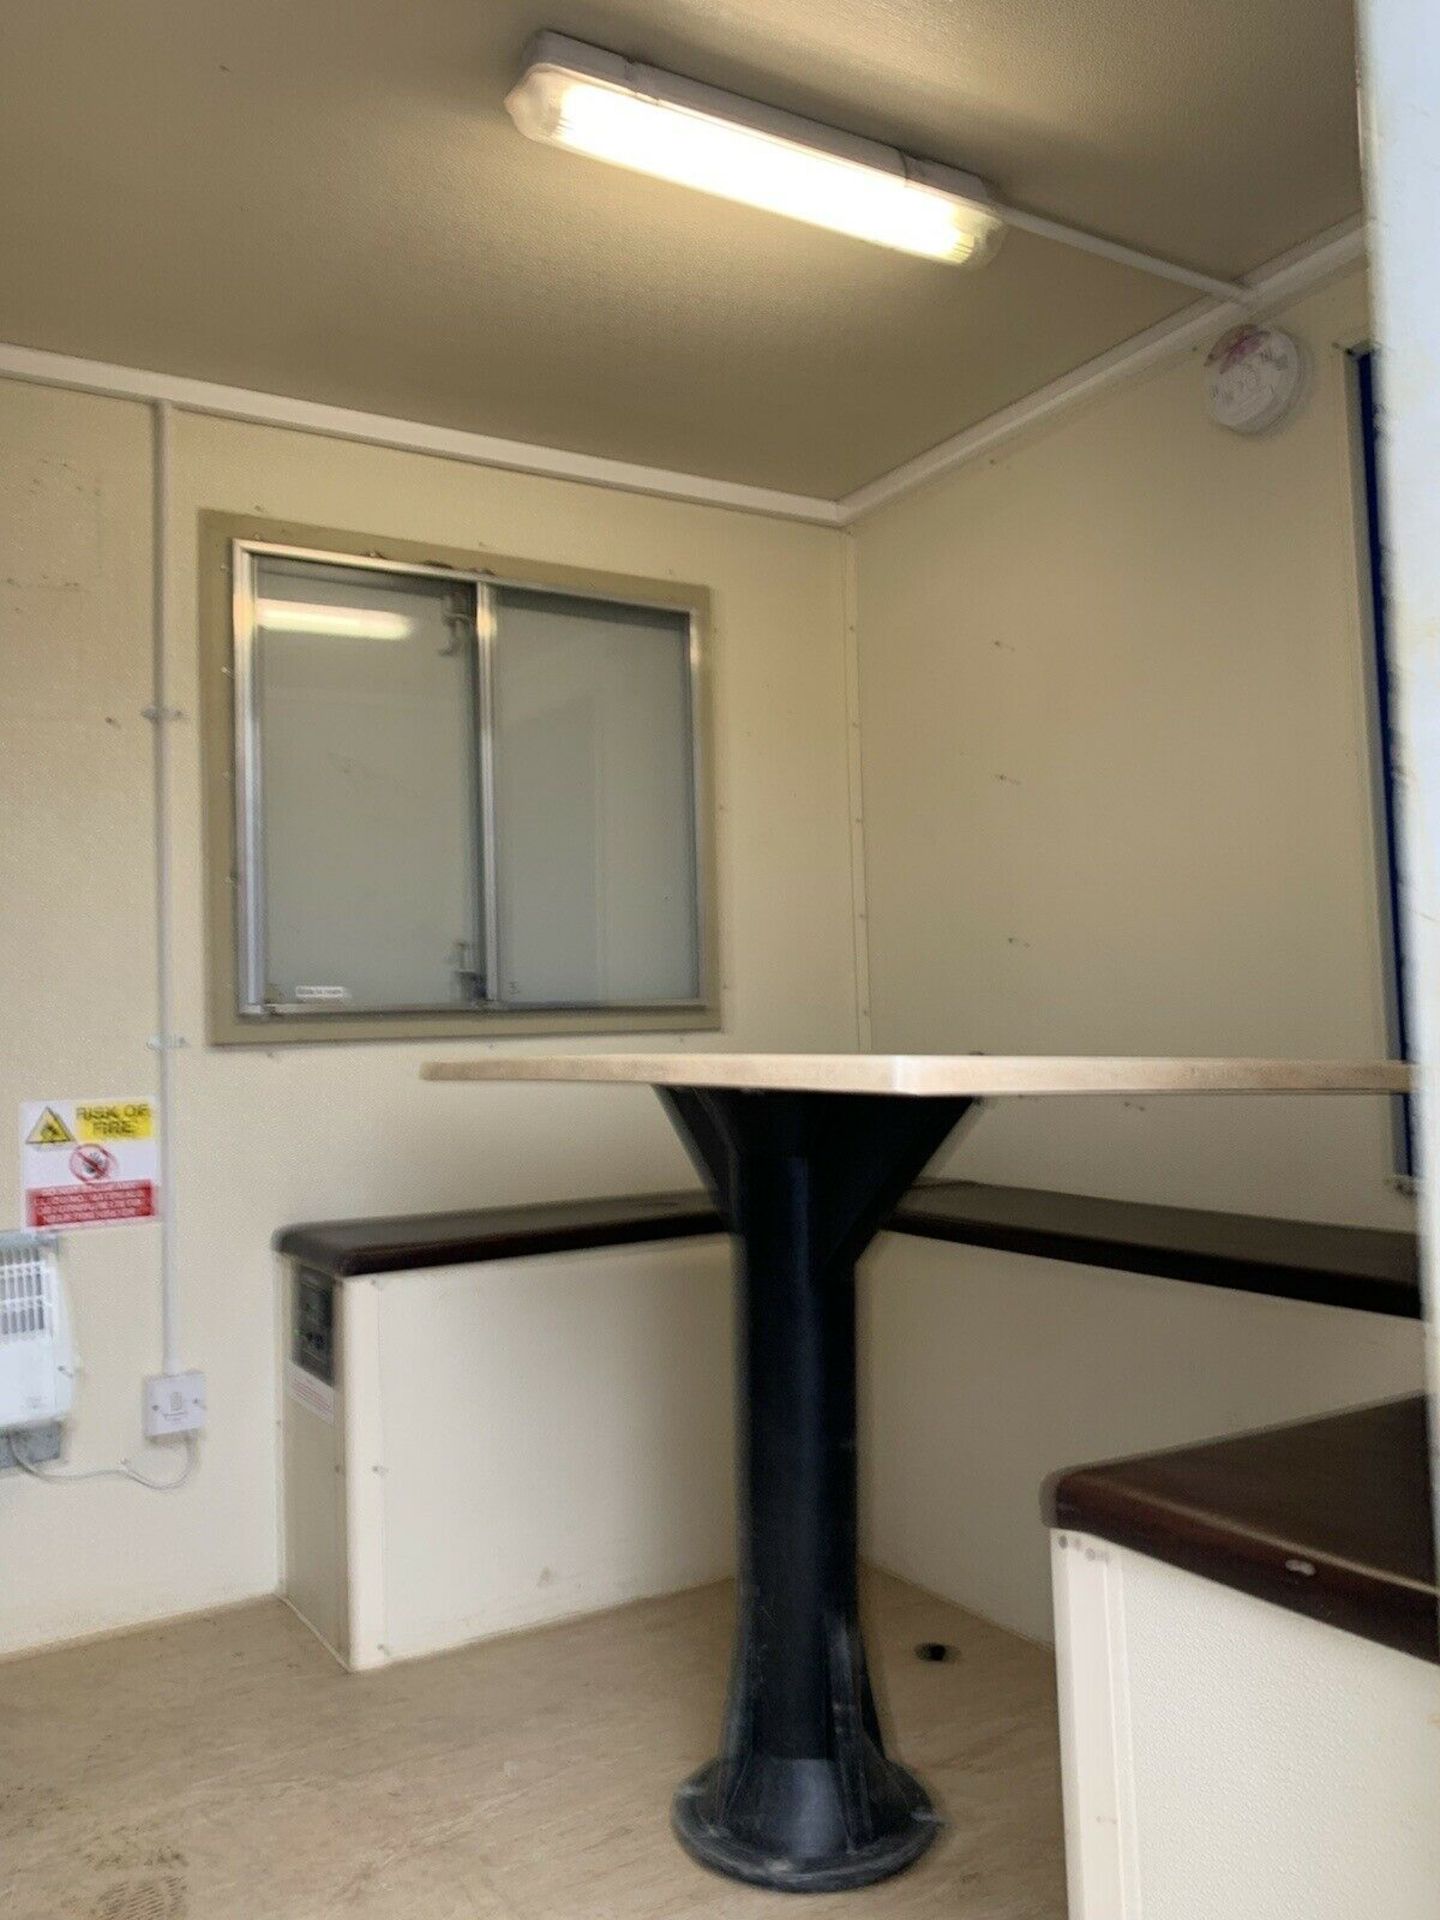 Groundhog Towable Welfare Unit Site Office Canteen - Image 7 of 9